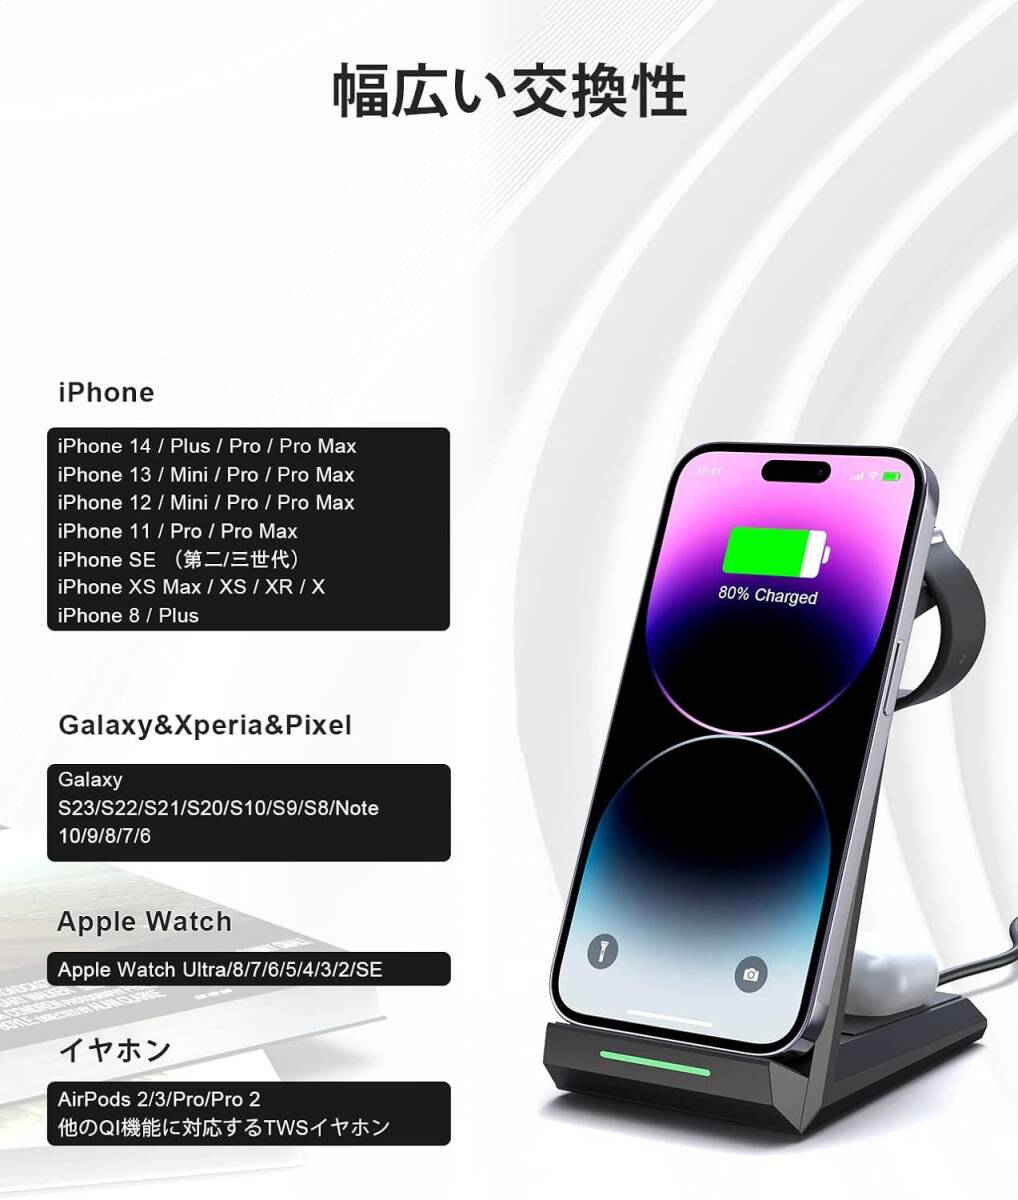 [YON-A60428393] 3 in 1 ワイヤレス充電器 急速充電スタンド 置くだけ充電 Apple Watch充電器 iPhone AirPods Pro/3/2 Apple Watch ギフト_画像2